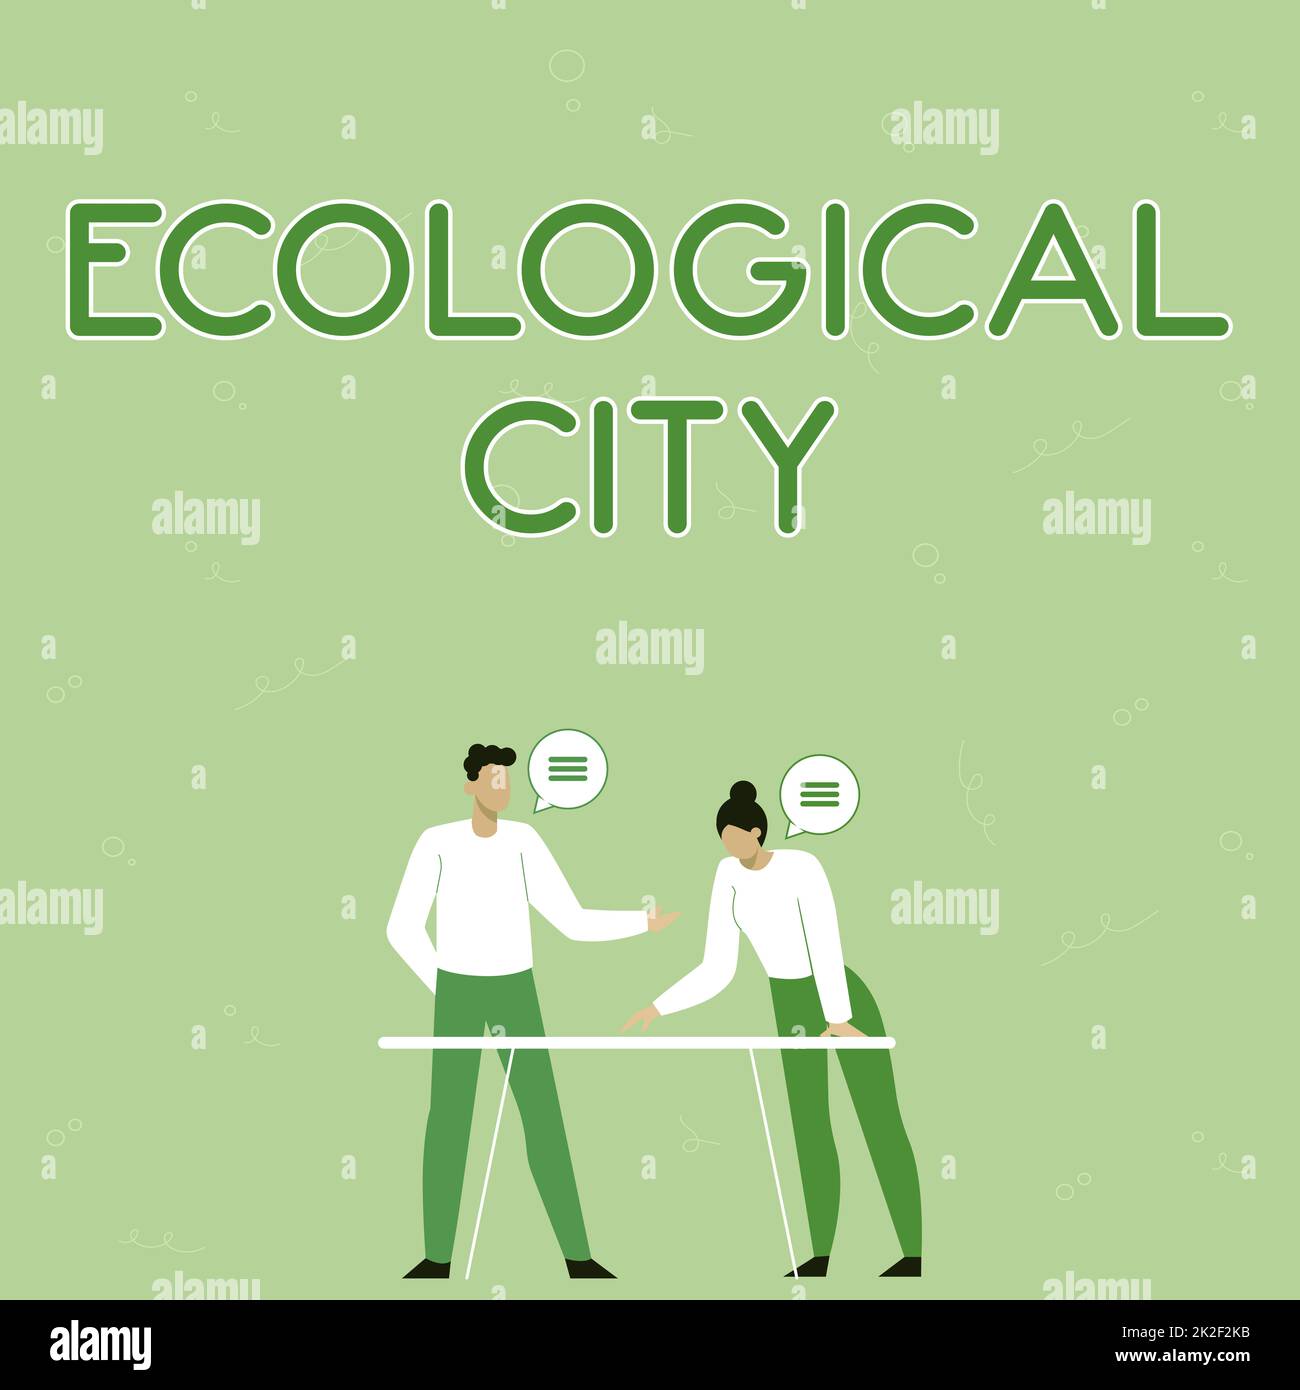 Writing displaying text Ecological City. Internet Concept human settlement modeled on the selfsustaining structure Partners Sharing New Ideas For Skill Improvement Work Strategies. Stock Photo